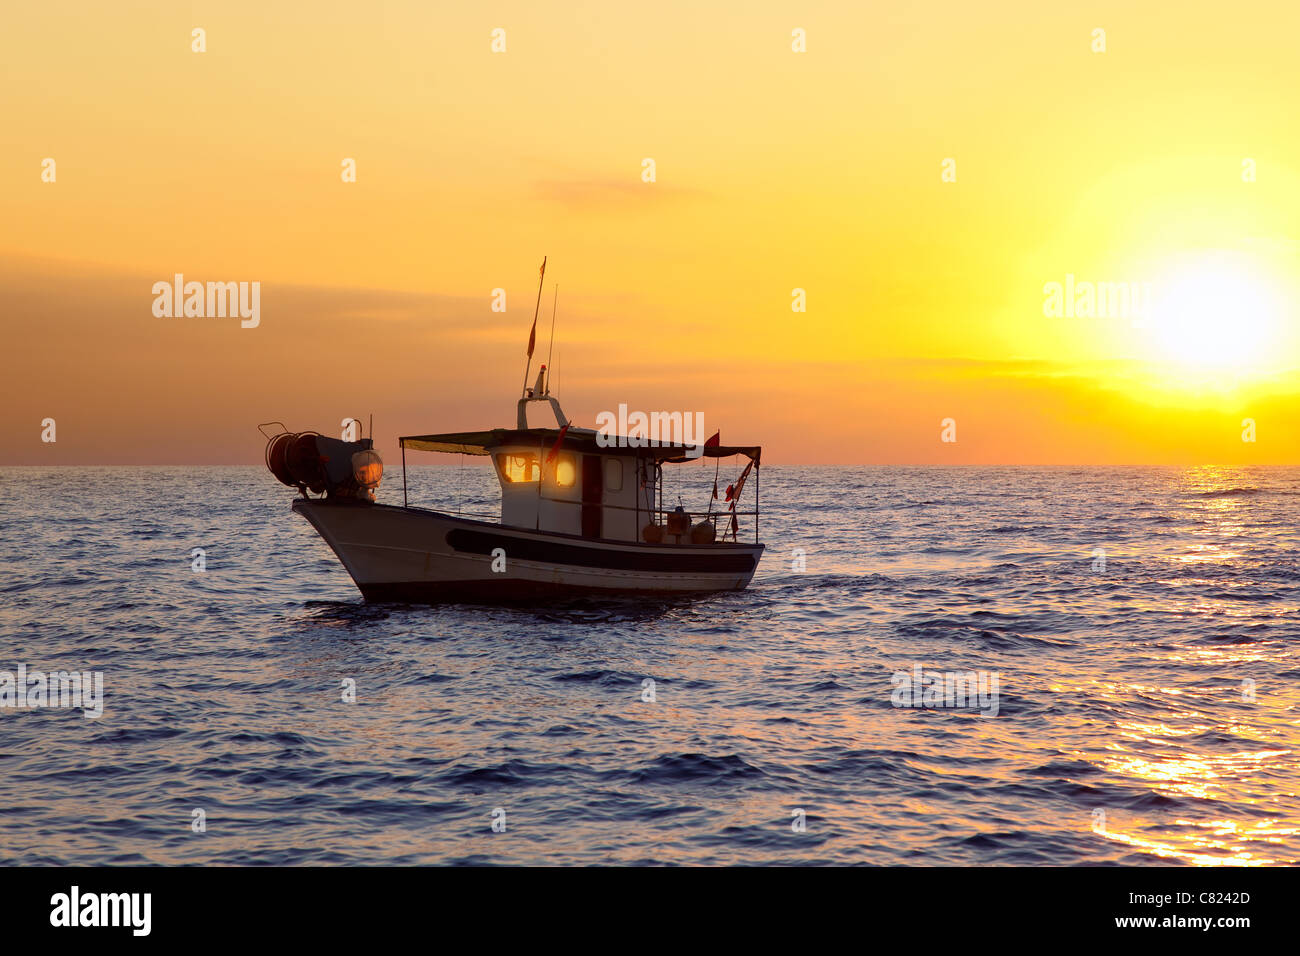 fishing boat in sunrise at Mediterranean sea traditional fishery Stock Photo